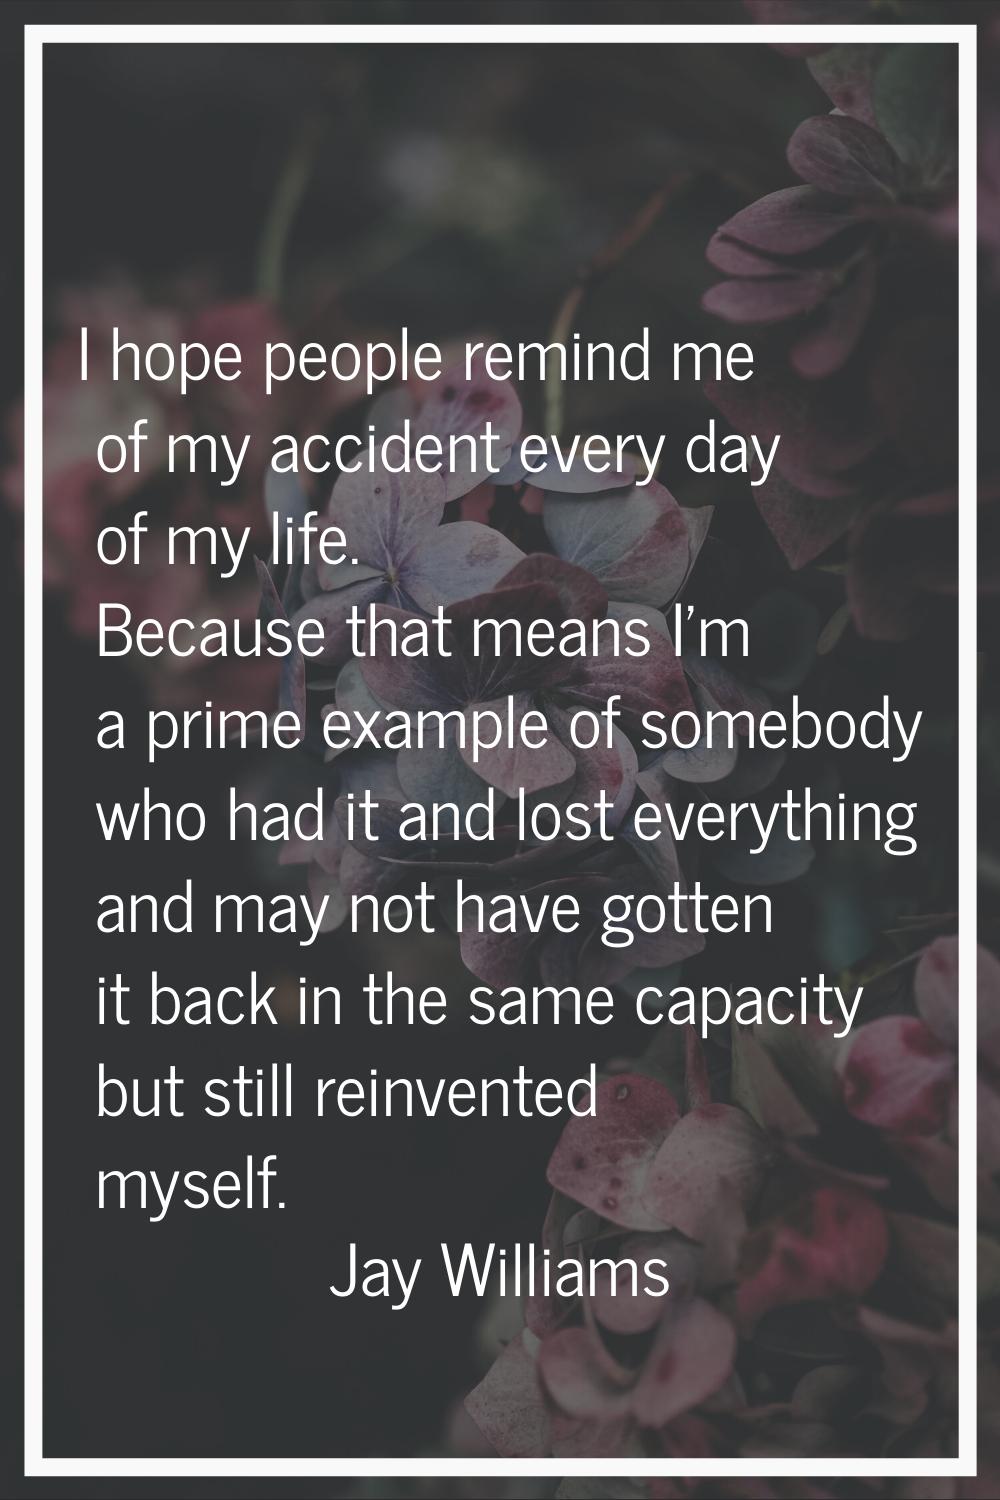 I hope people remind me of my accident every day of my life. Because that means I'm a prime example